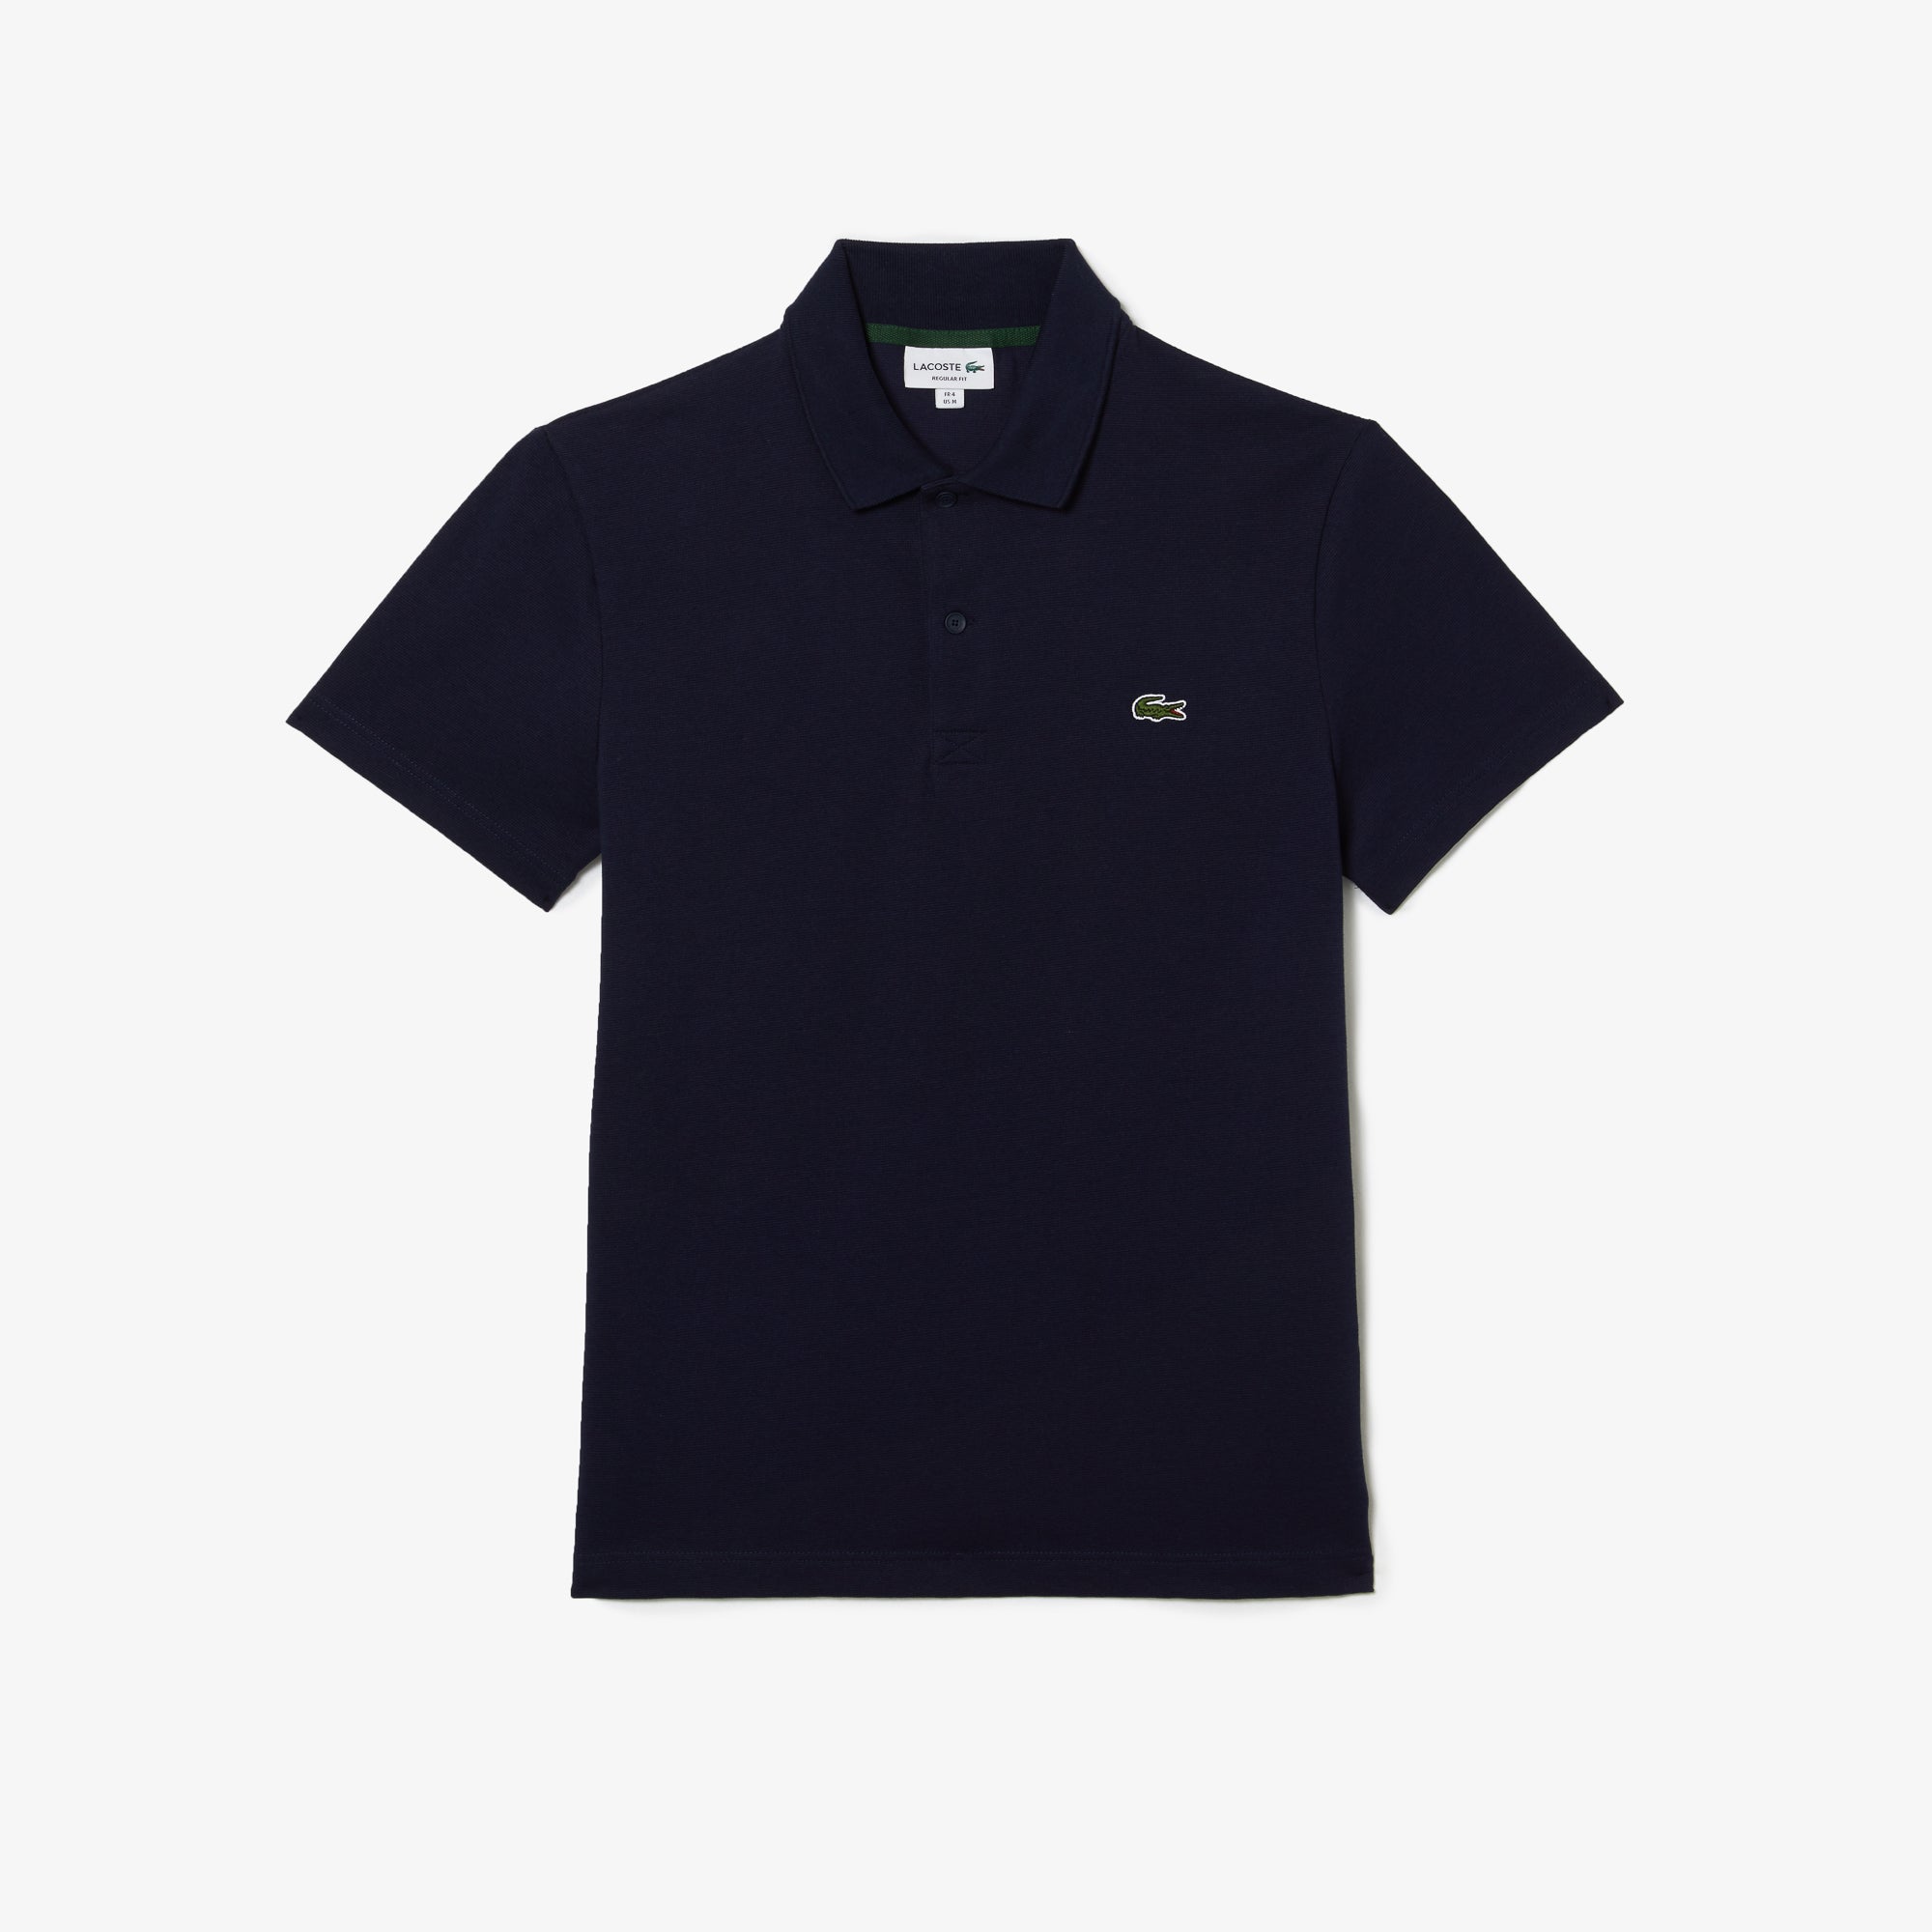 Buy Men'S Lacoste Regular Fit Stretch Organic Cotton Polo - Dh0783 ...